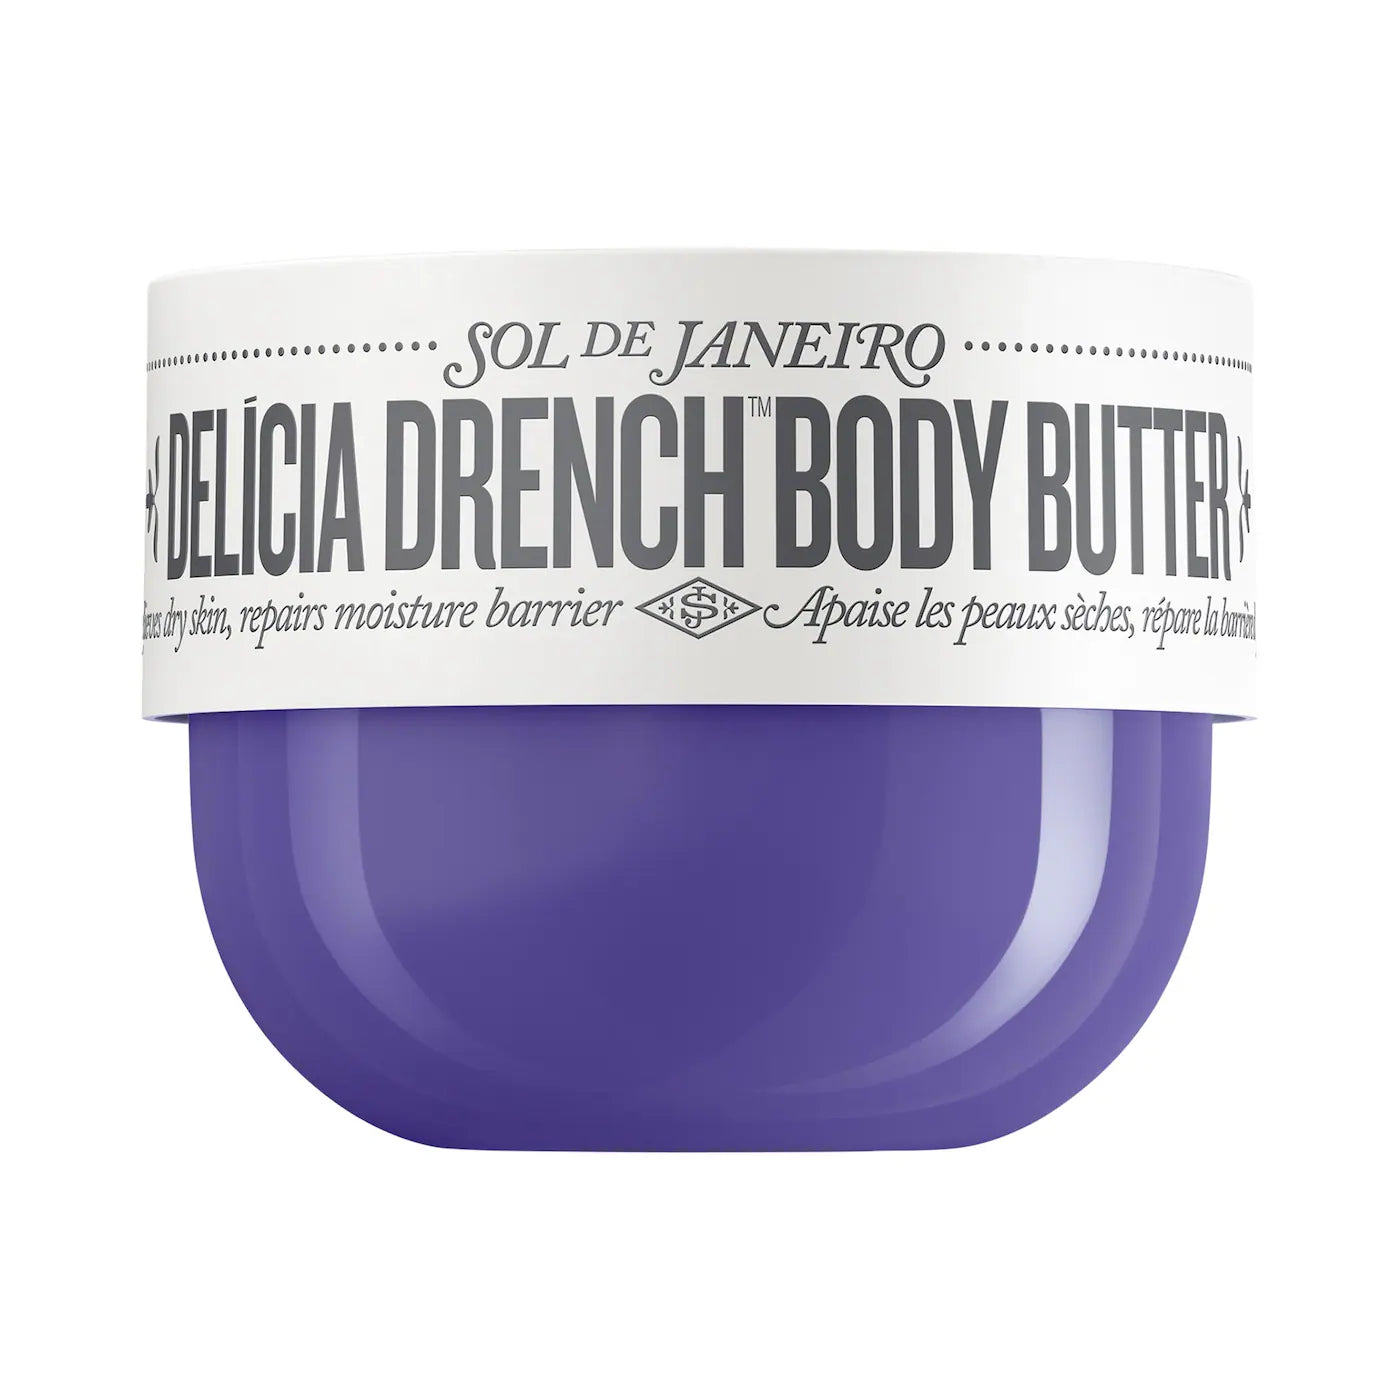 Delícia Drench™ Body Butter for Intense Moisture and Skin Barrier Repair